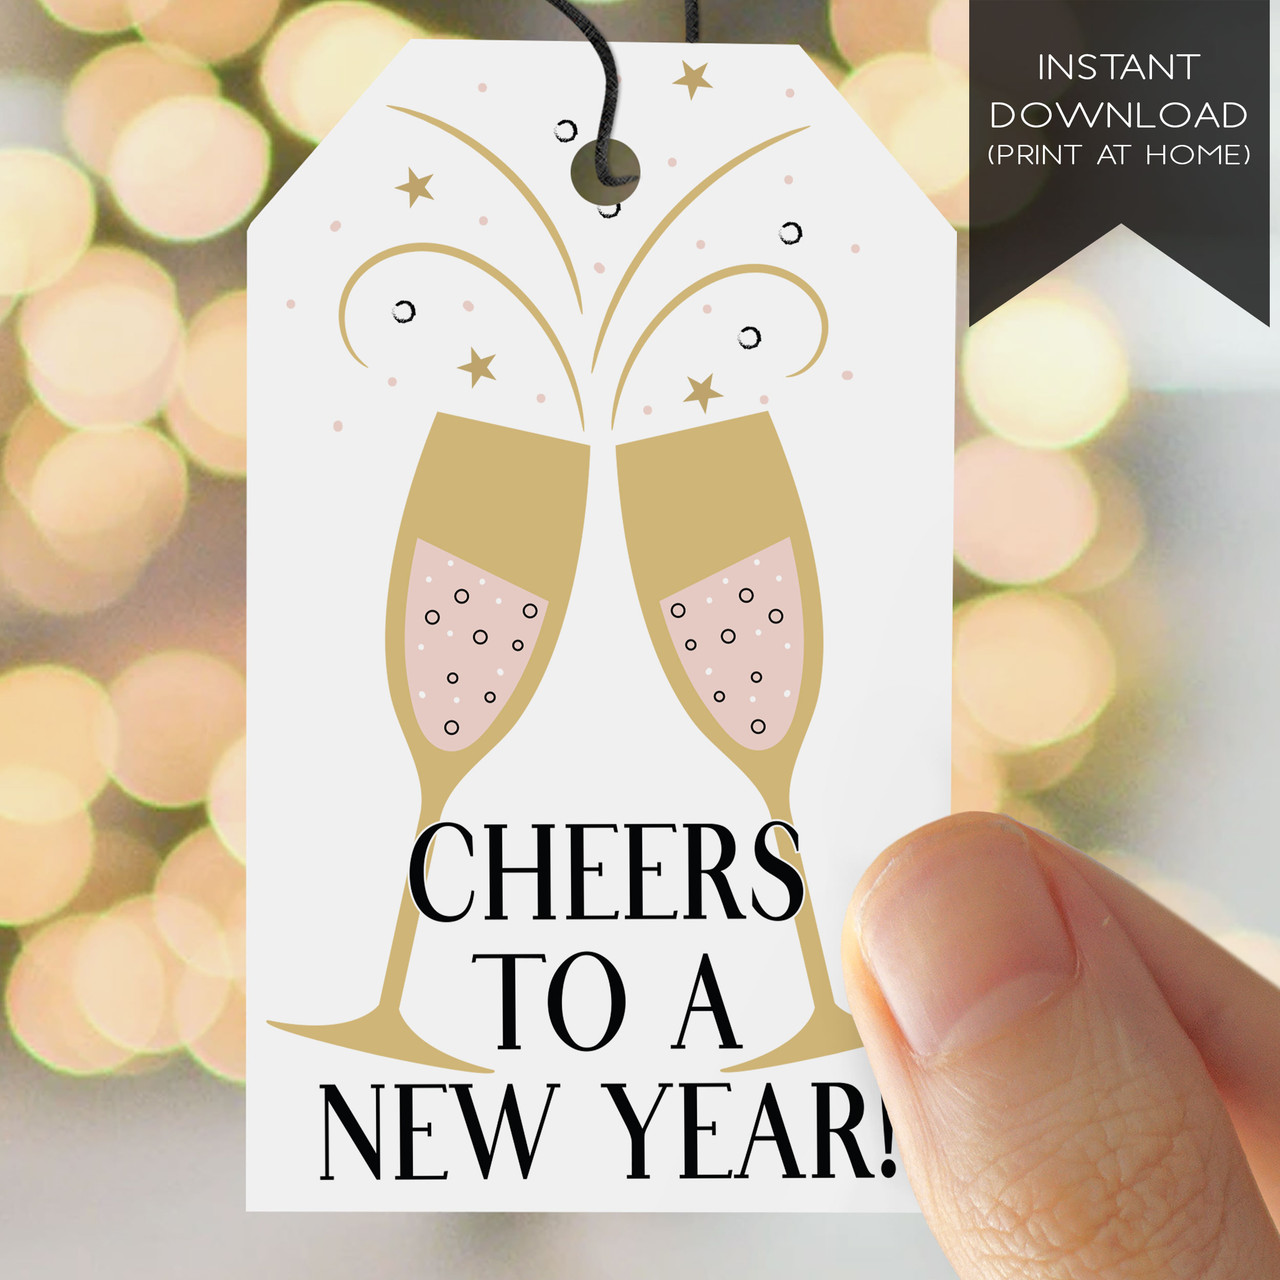 https://cdn11.bigcommerce.com/s-5grzuu6/images/stencil/1280w/products/6445/51818/Cheers-to-a-New-Years_Eve_Printable_Instant-Download-Hang-Tags__79331.1669751045.jpg